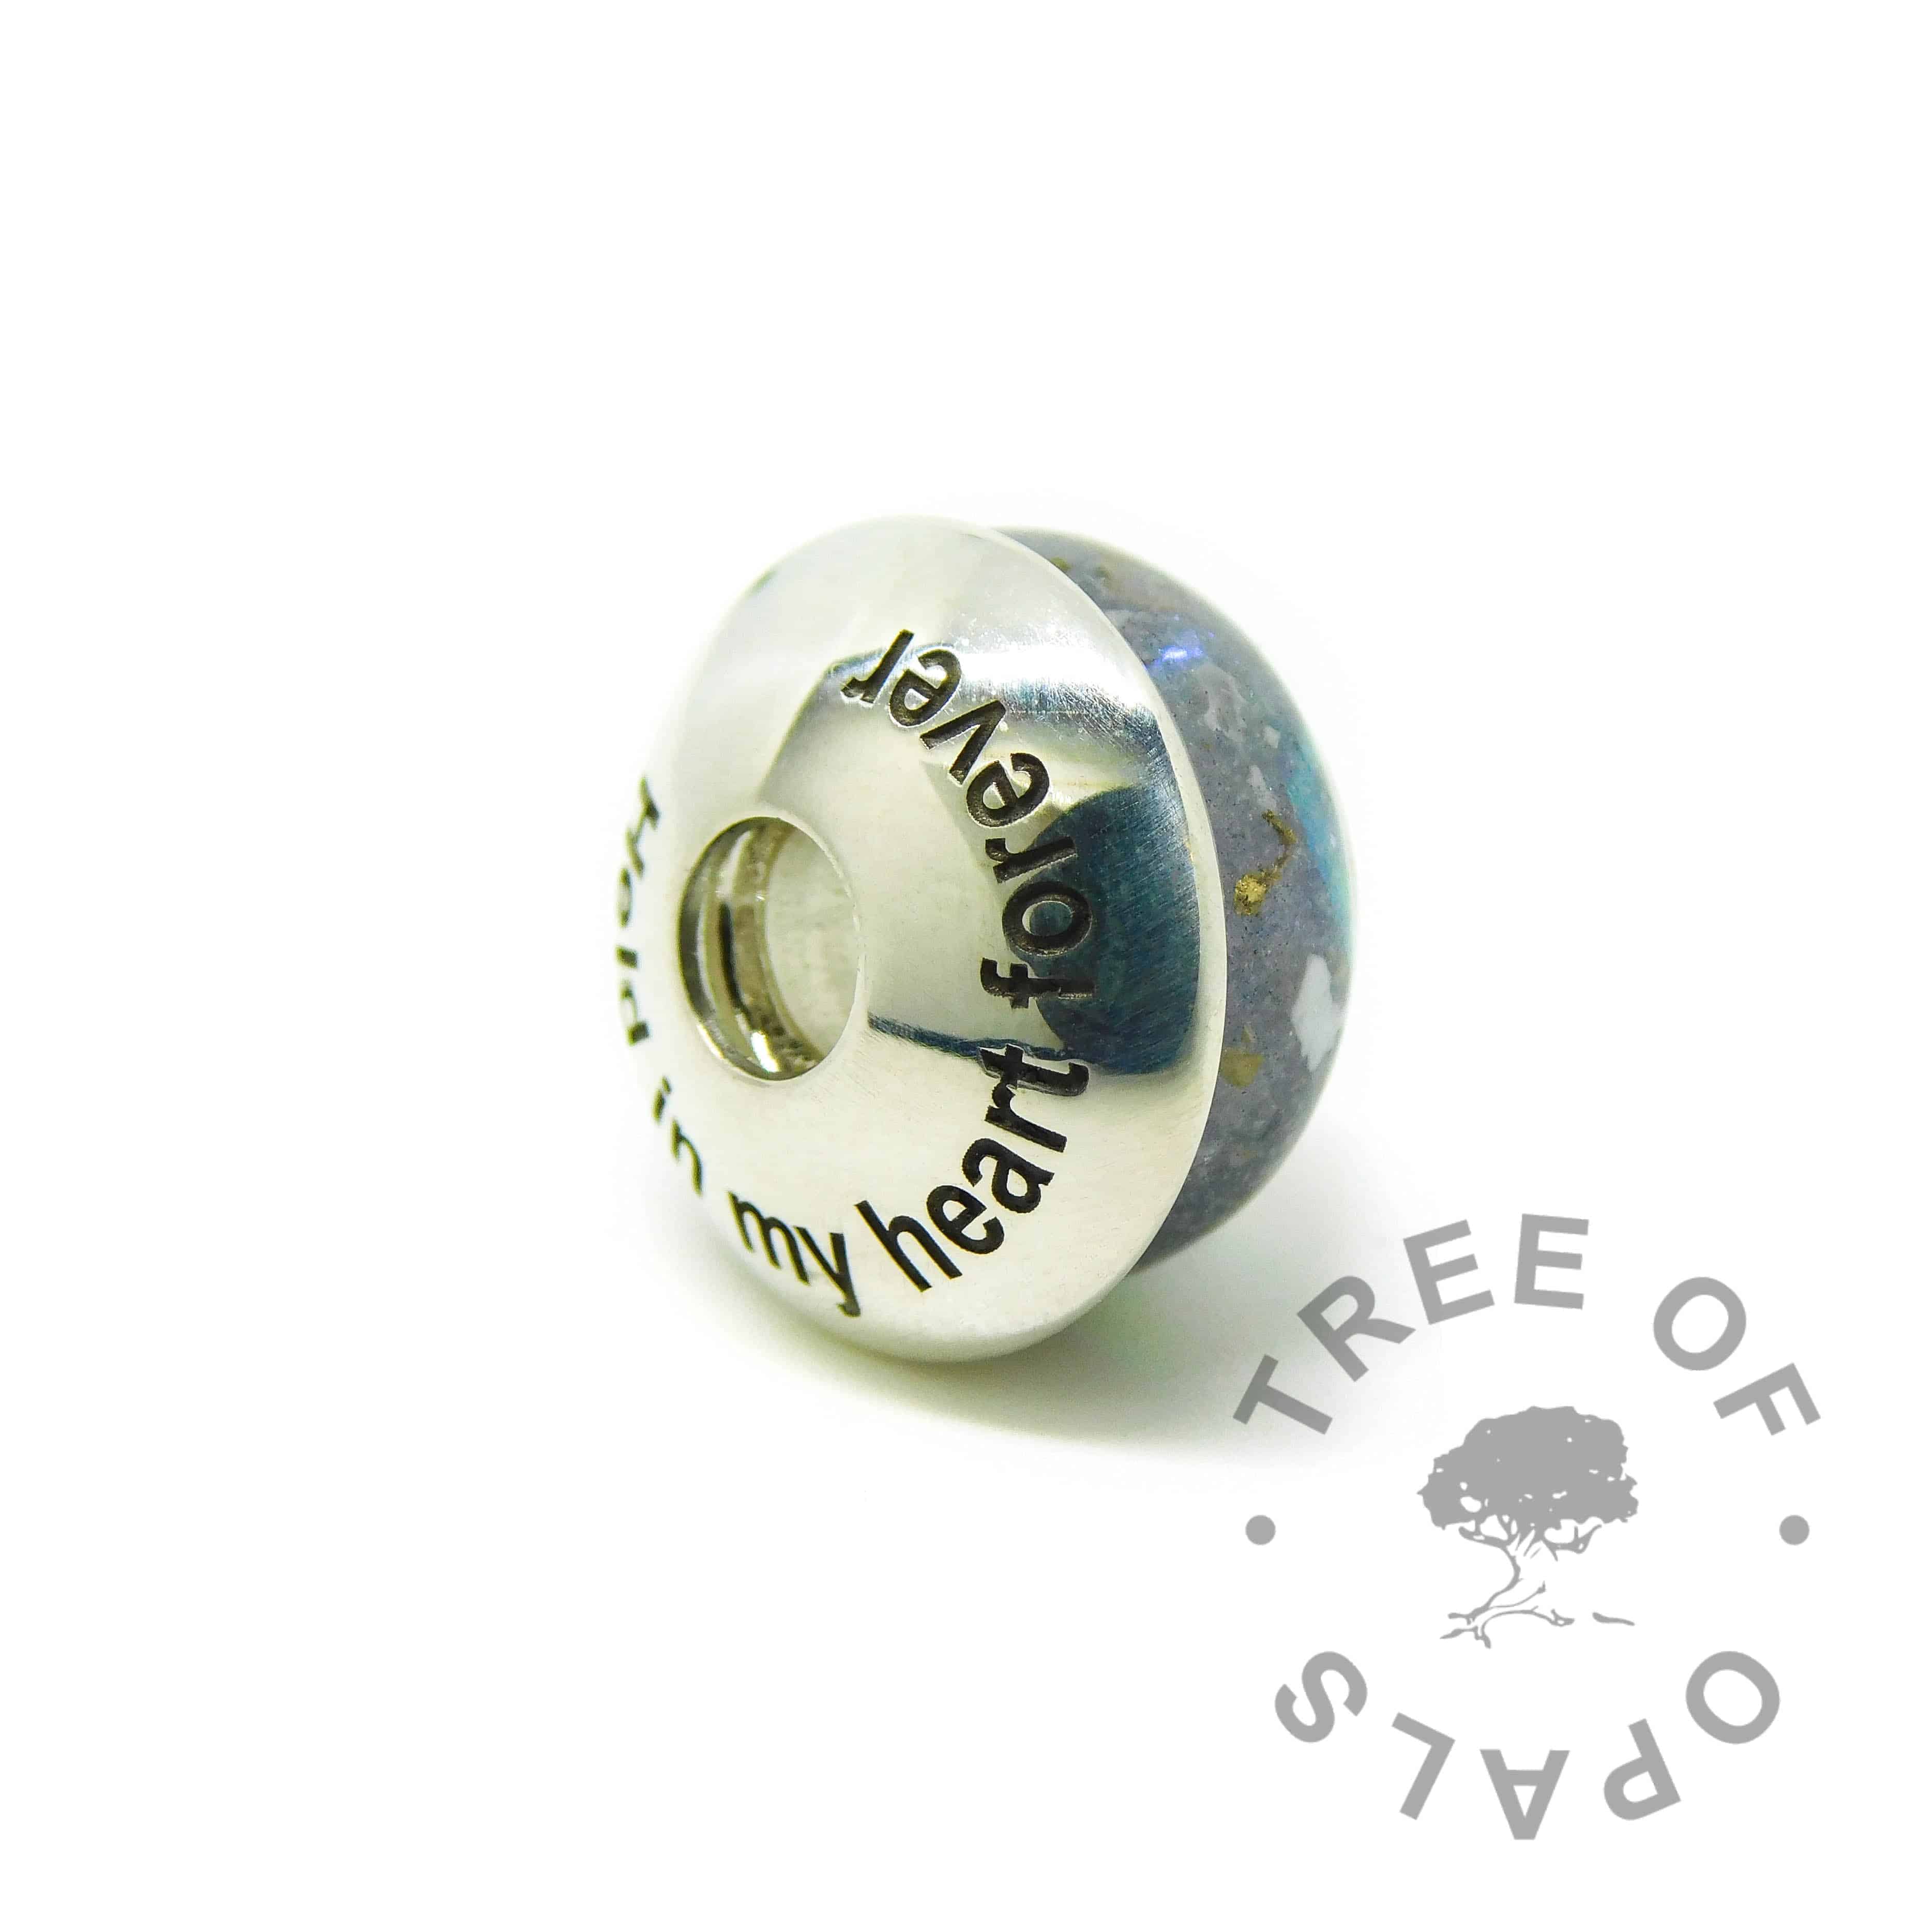 Arial font engraved  charm washer, memorial charm shown with washer. Washers are not attached to charms, sold separately. Handmade with solid sterling EcoSilver, 925 stamped on the back. Watermarked copyright Tree of Opals memorial jewellery image